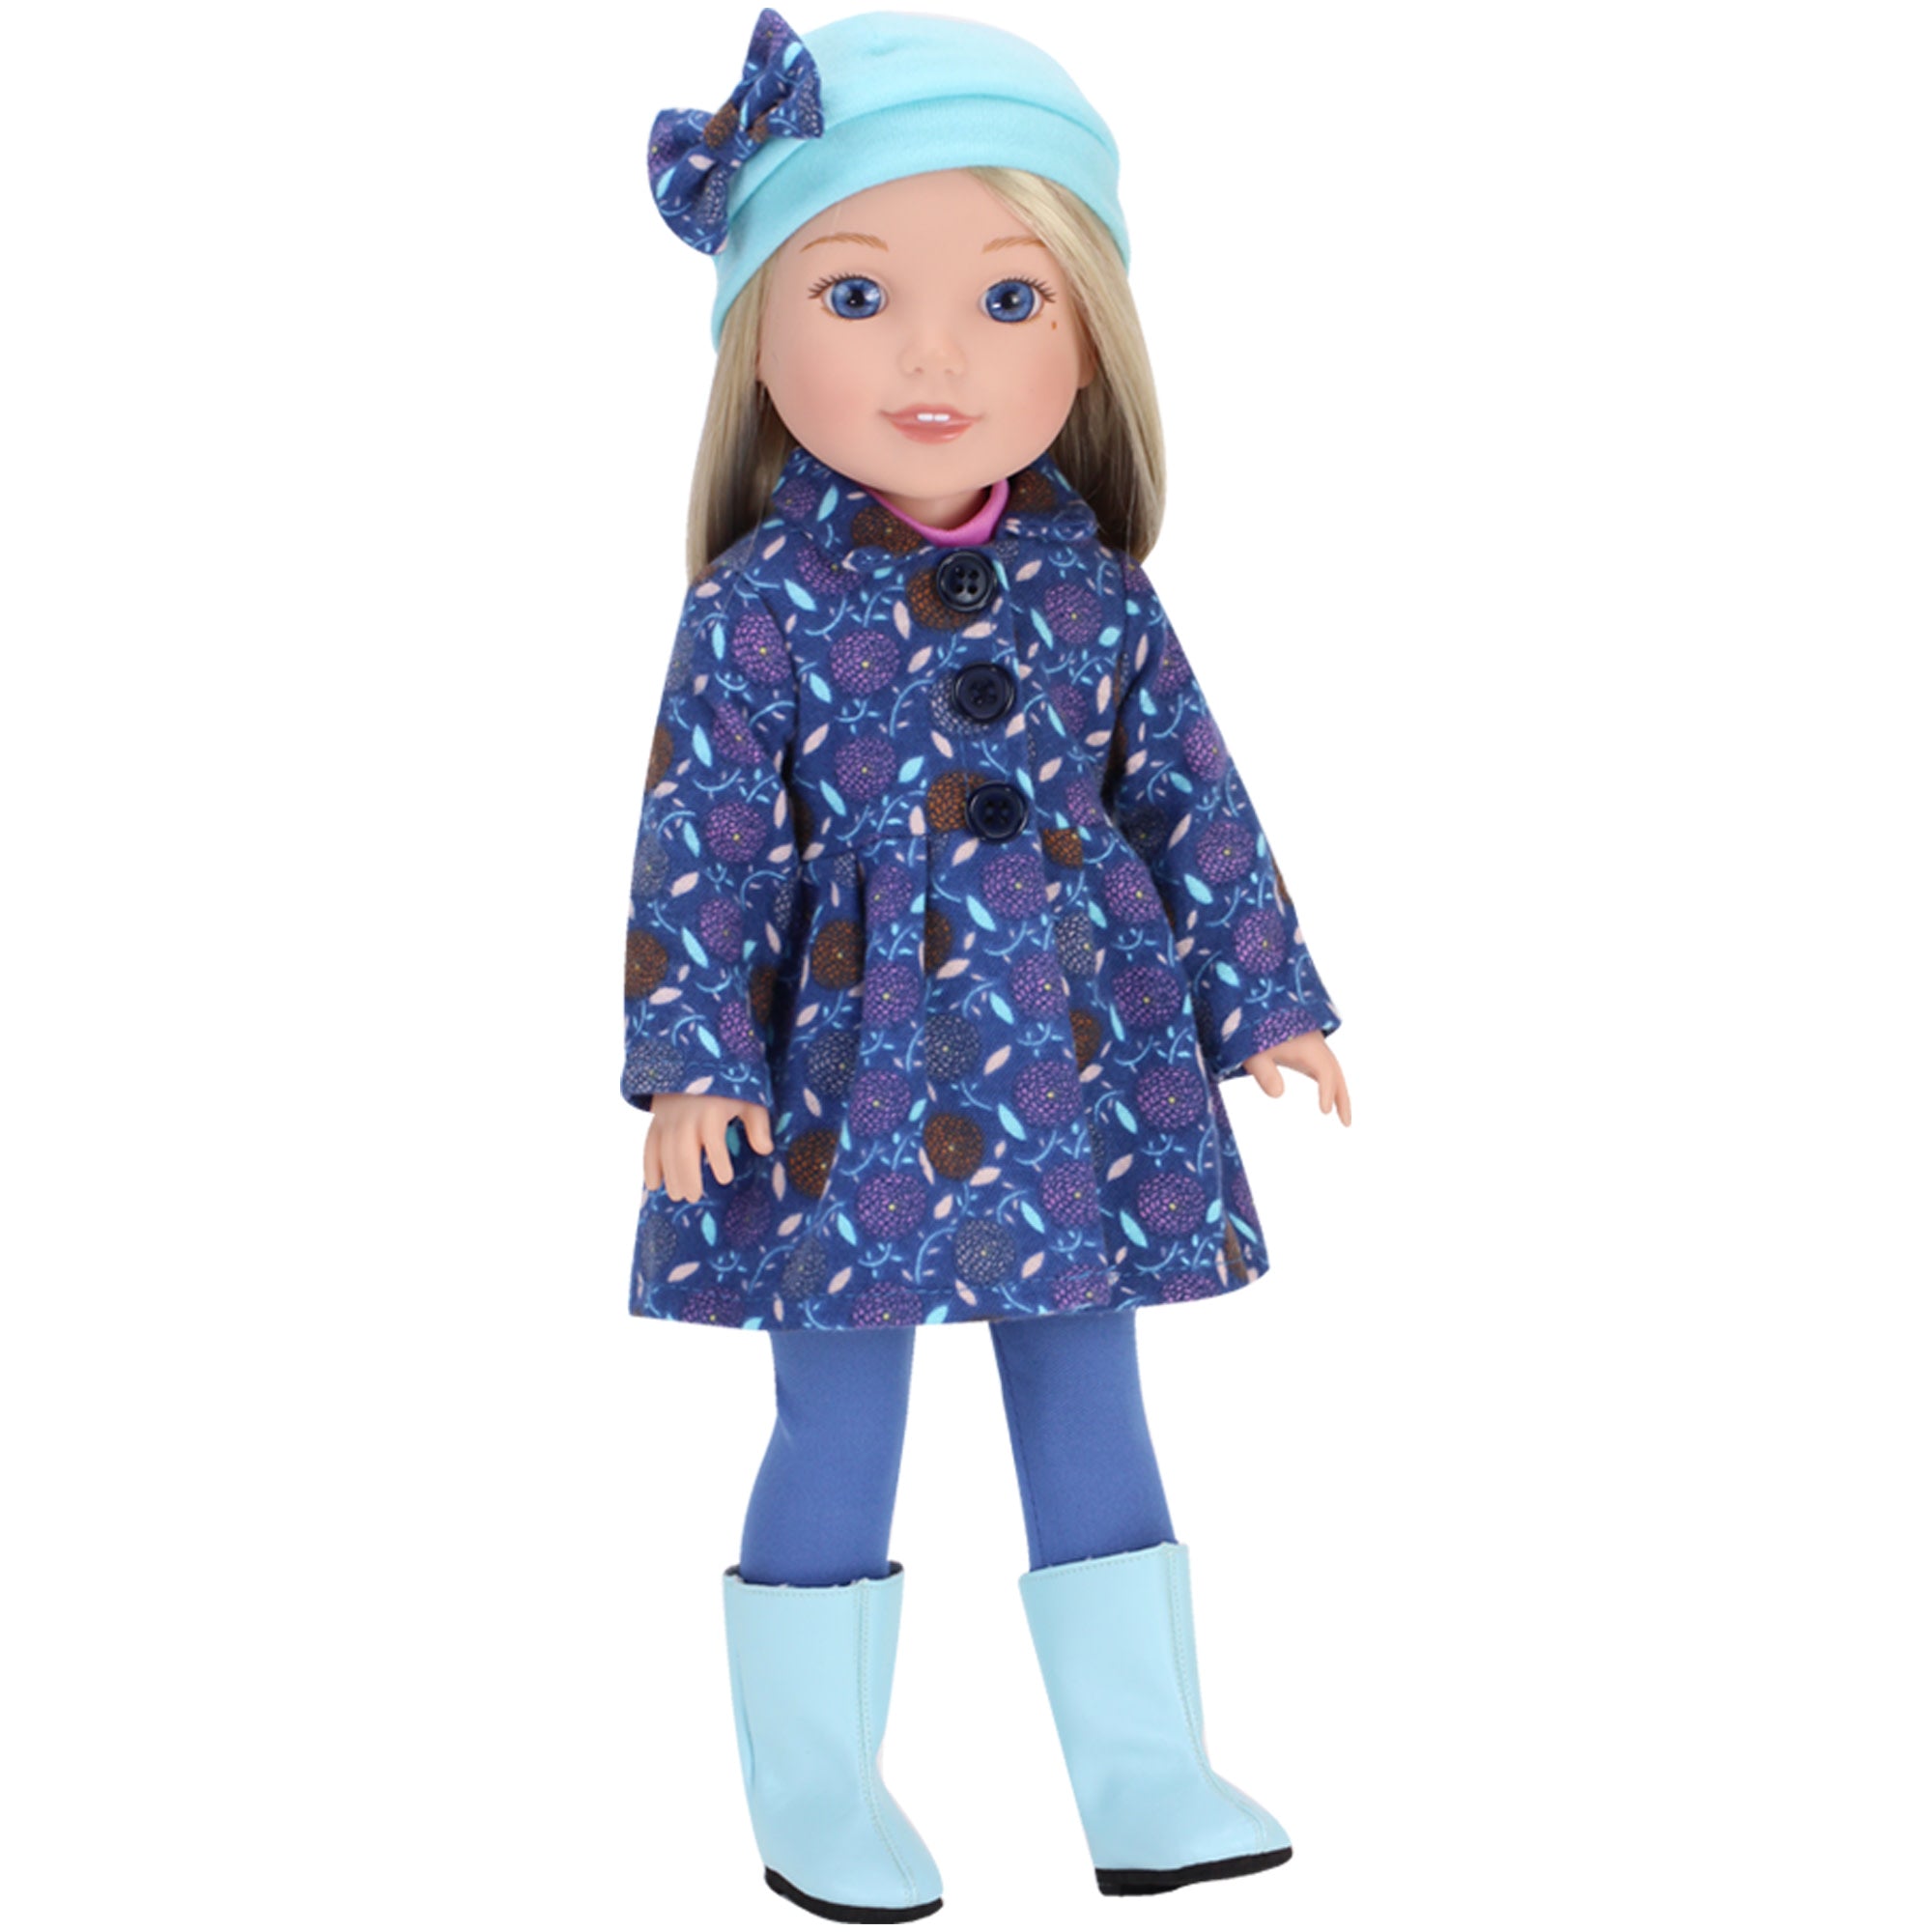 Sophia's Winter Outfit with Boots for 14.5" Dolls, Blue